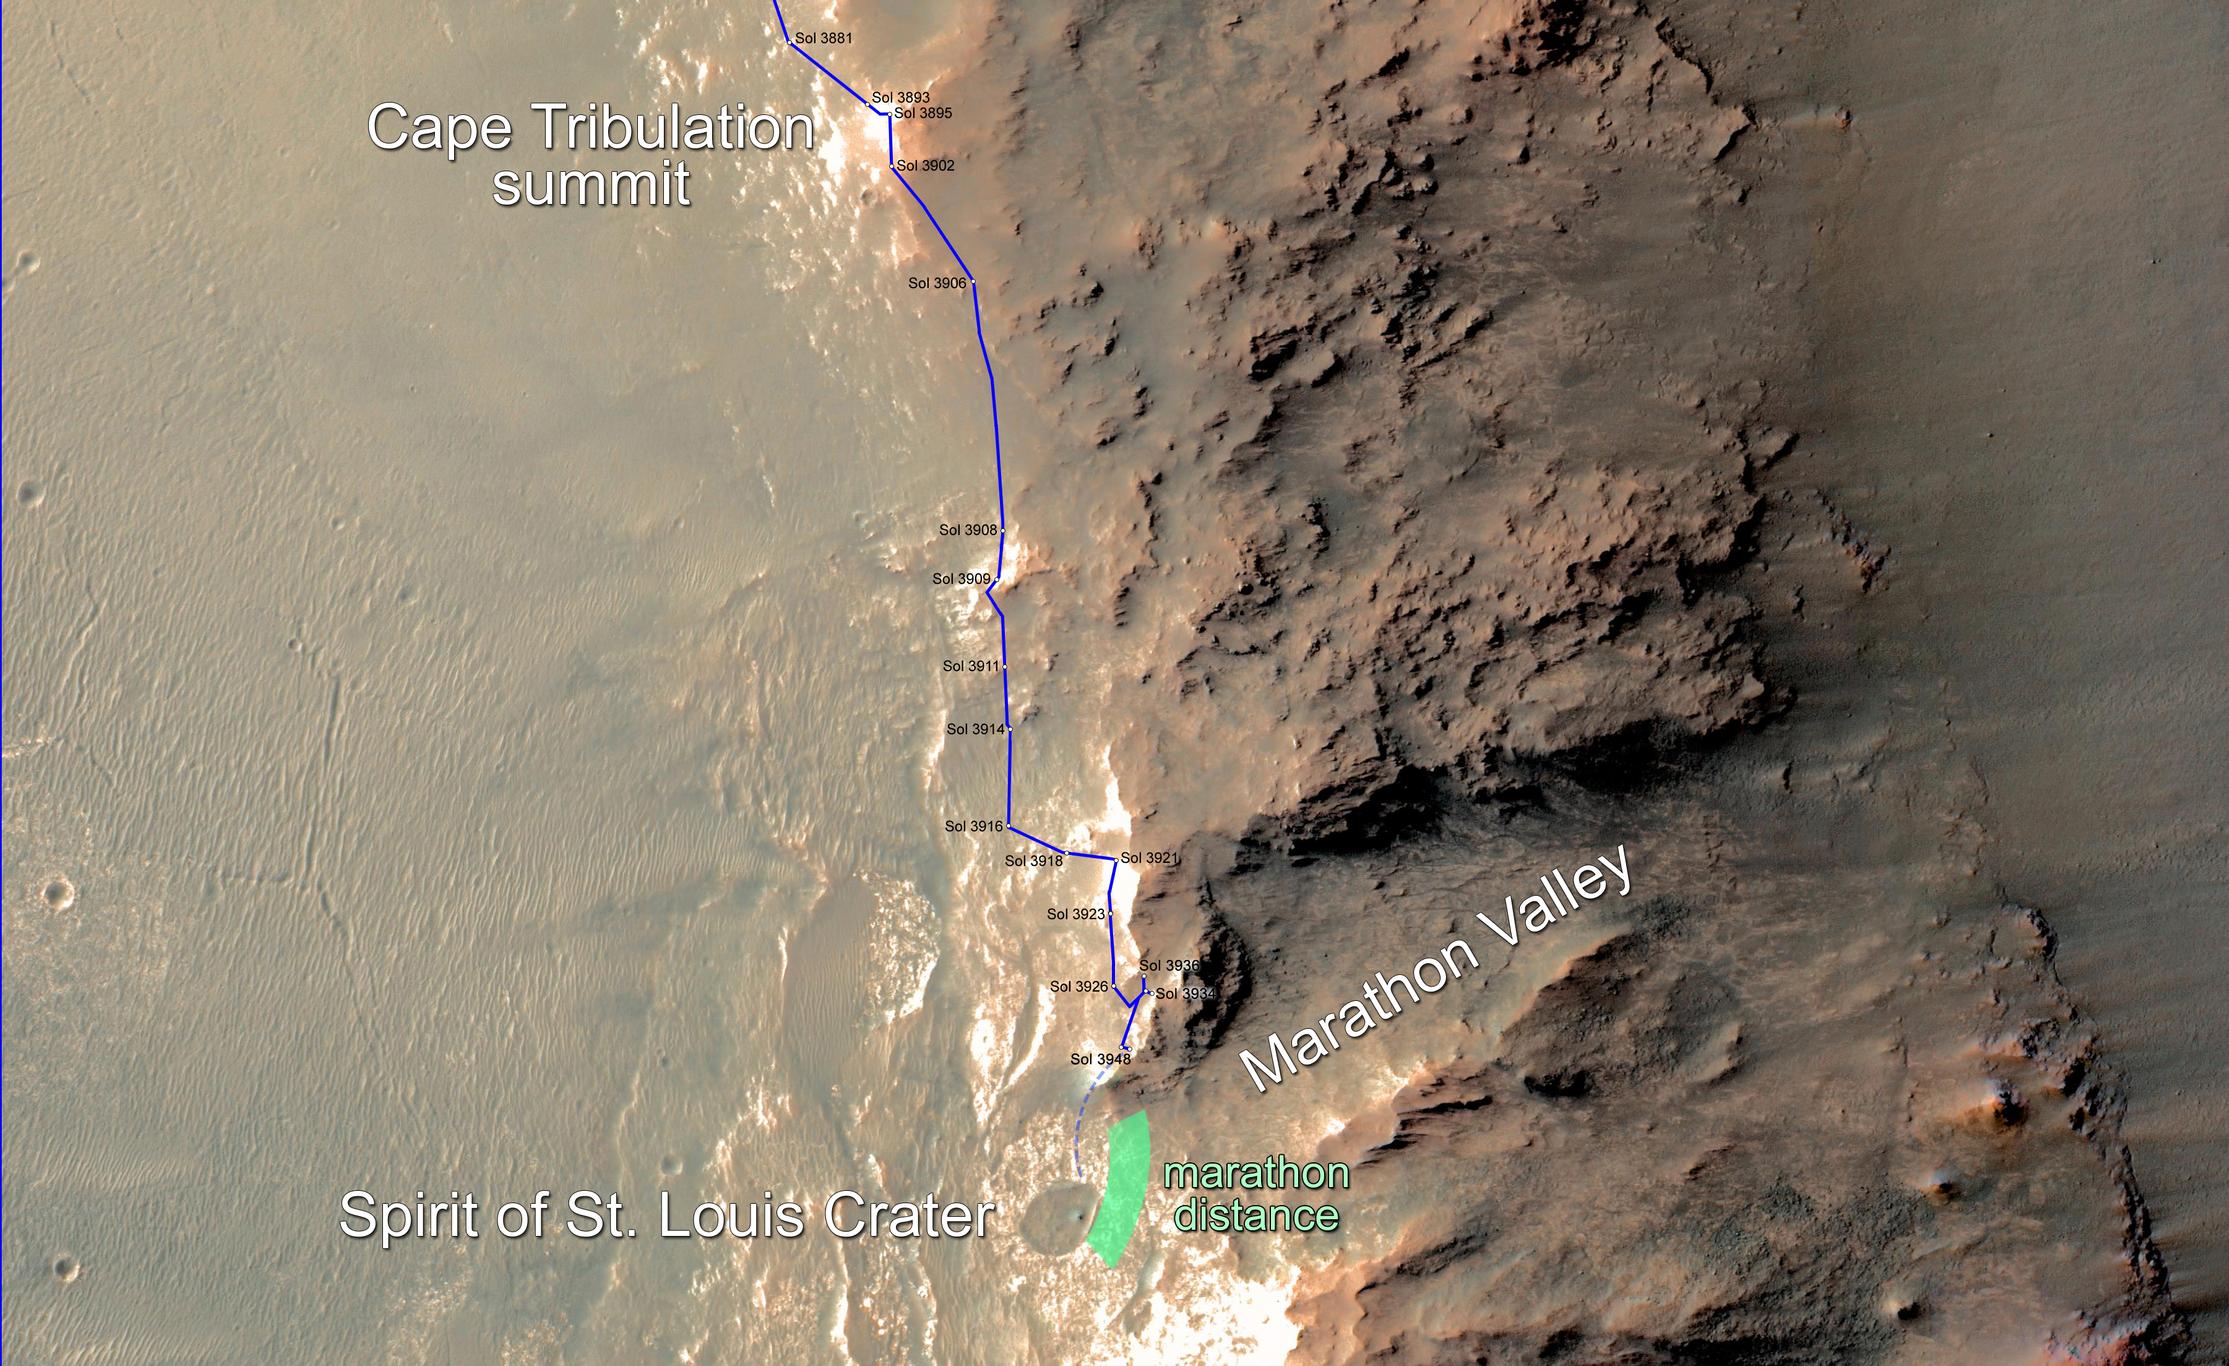 This map updates progress that NASA's Mars Exploration Rover Opportunity is making toward reaching a driving distance equivalent to a marathon footrace. It indicates the rover position on March 5, 2015, relative to where it could surpass that distance.